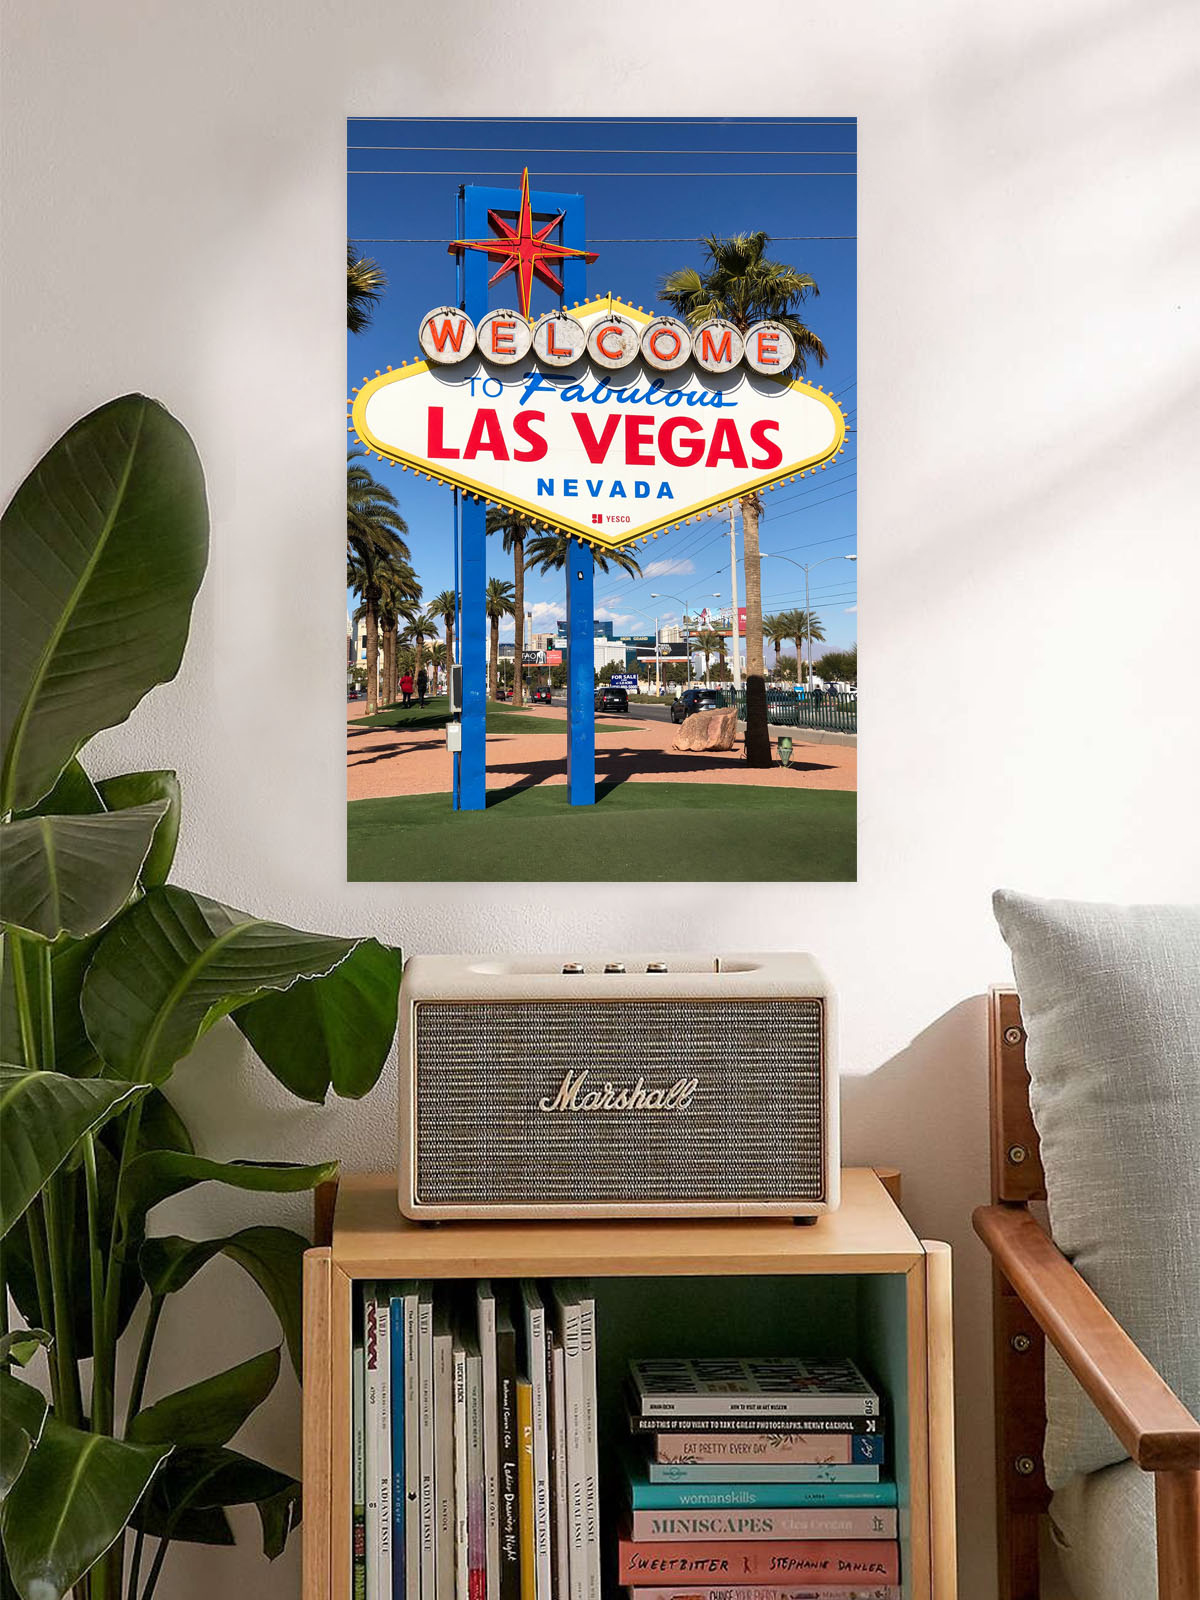 Awkward Styles Welcome to Fabulous Las Vegas Sign Poster Artwork Las Vegas Unframed Decor for Office Welcome to Fabulous Las Vegas Poster Wall Art Printed Photo American Poster Stylish Decor Ideas - image 2 of 3